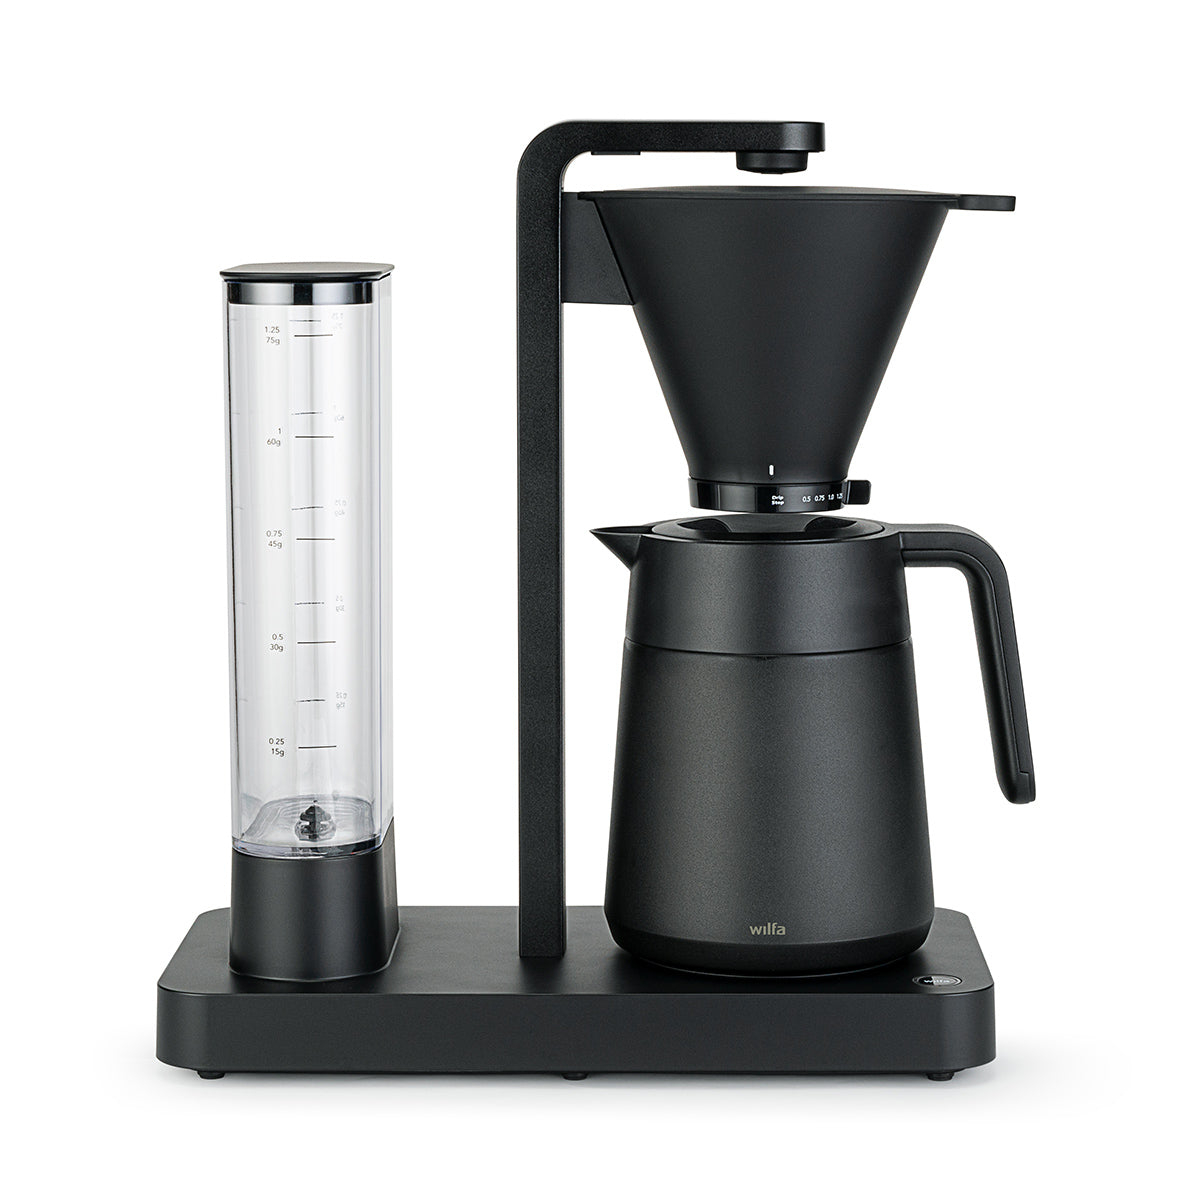 Wilfa Performance Thermo Coffee Maker and Uniform+ Coffee Grinder Bundle